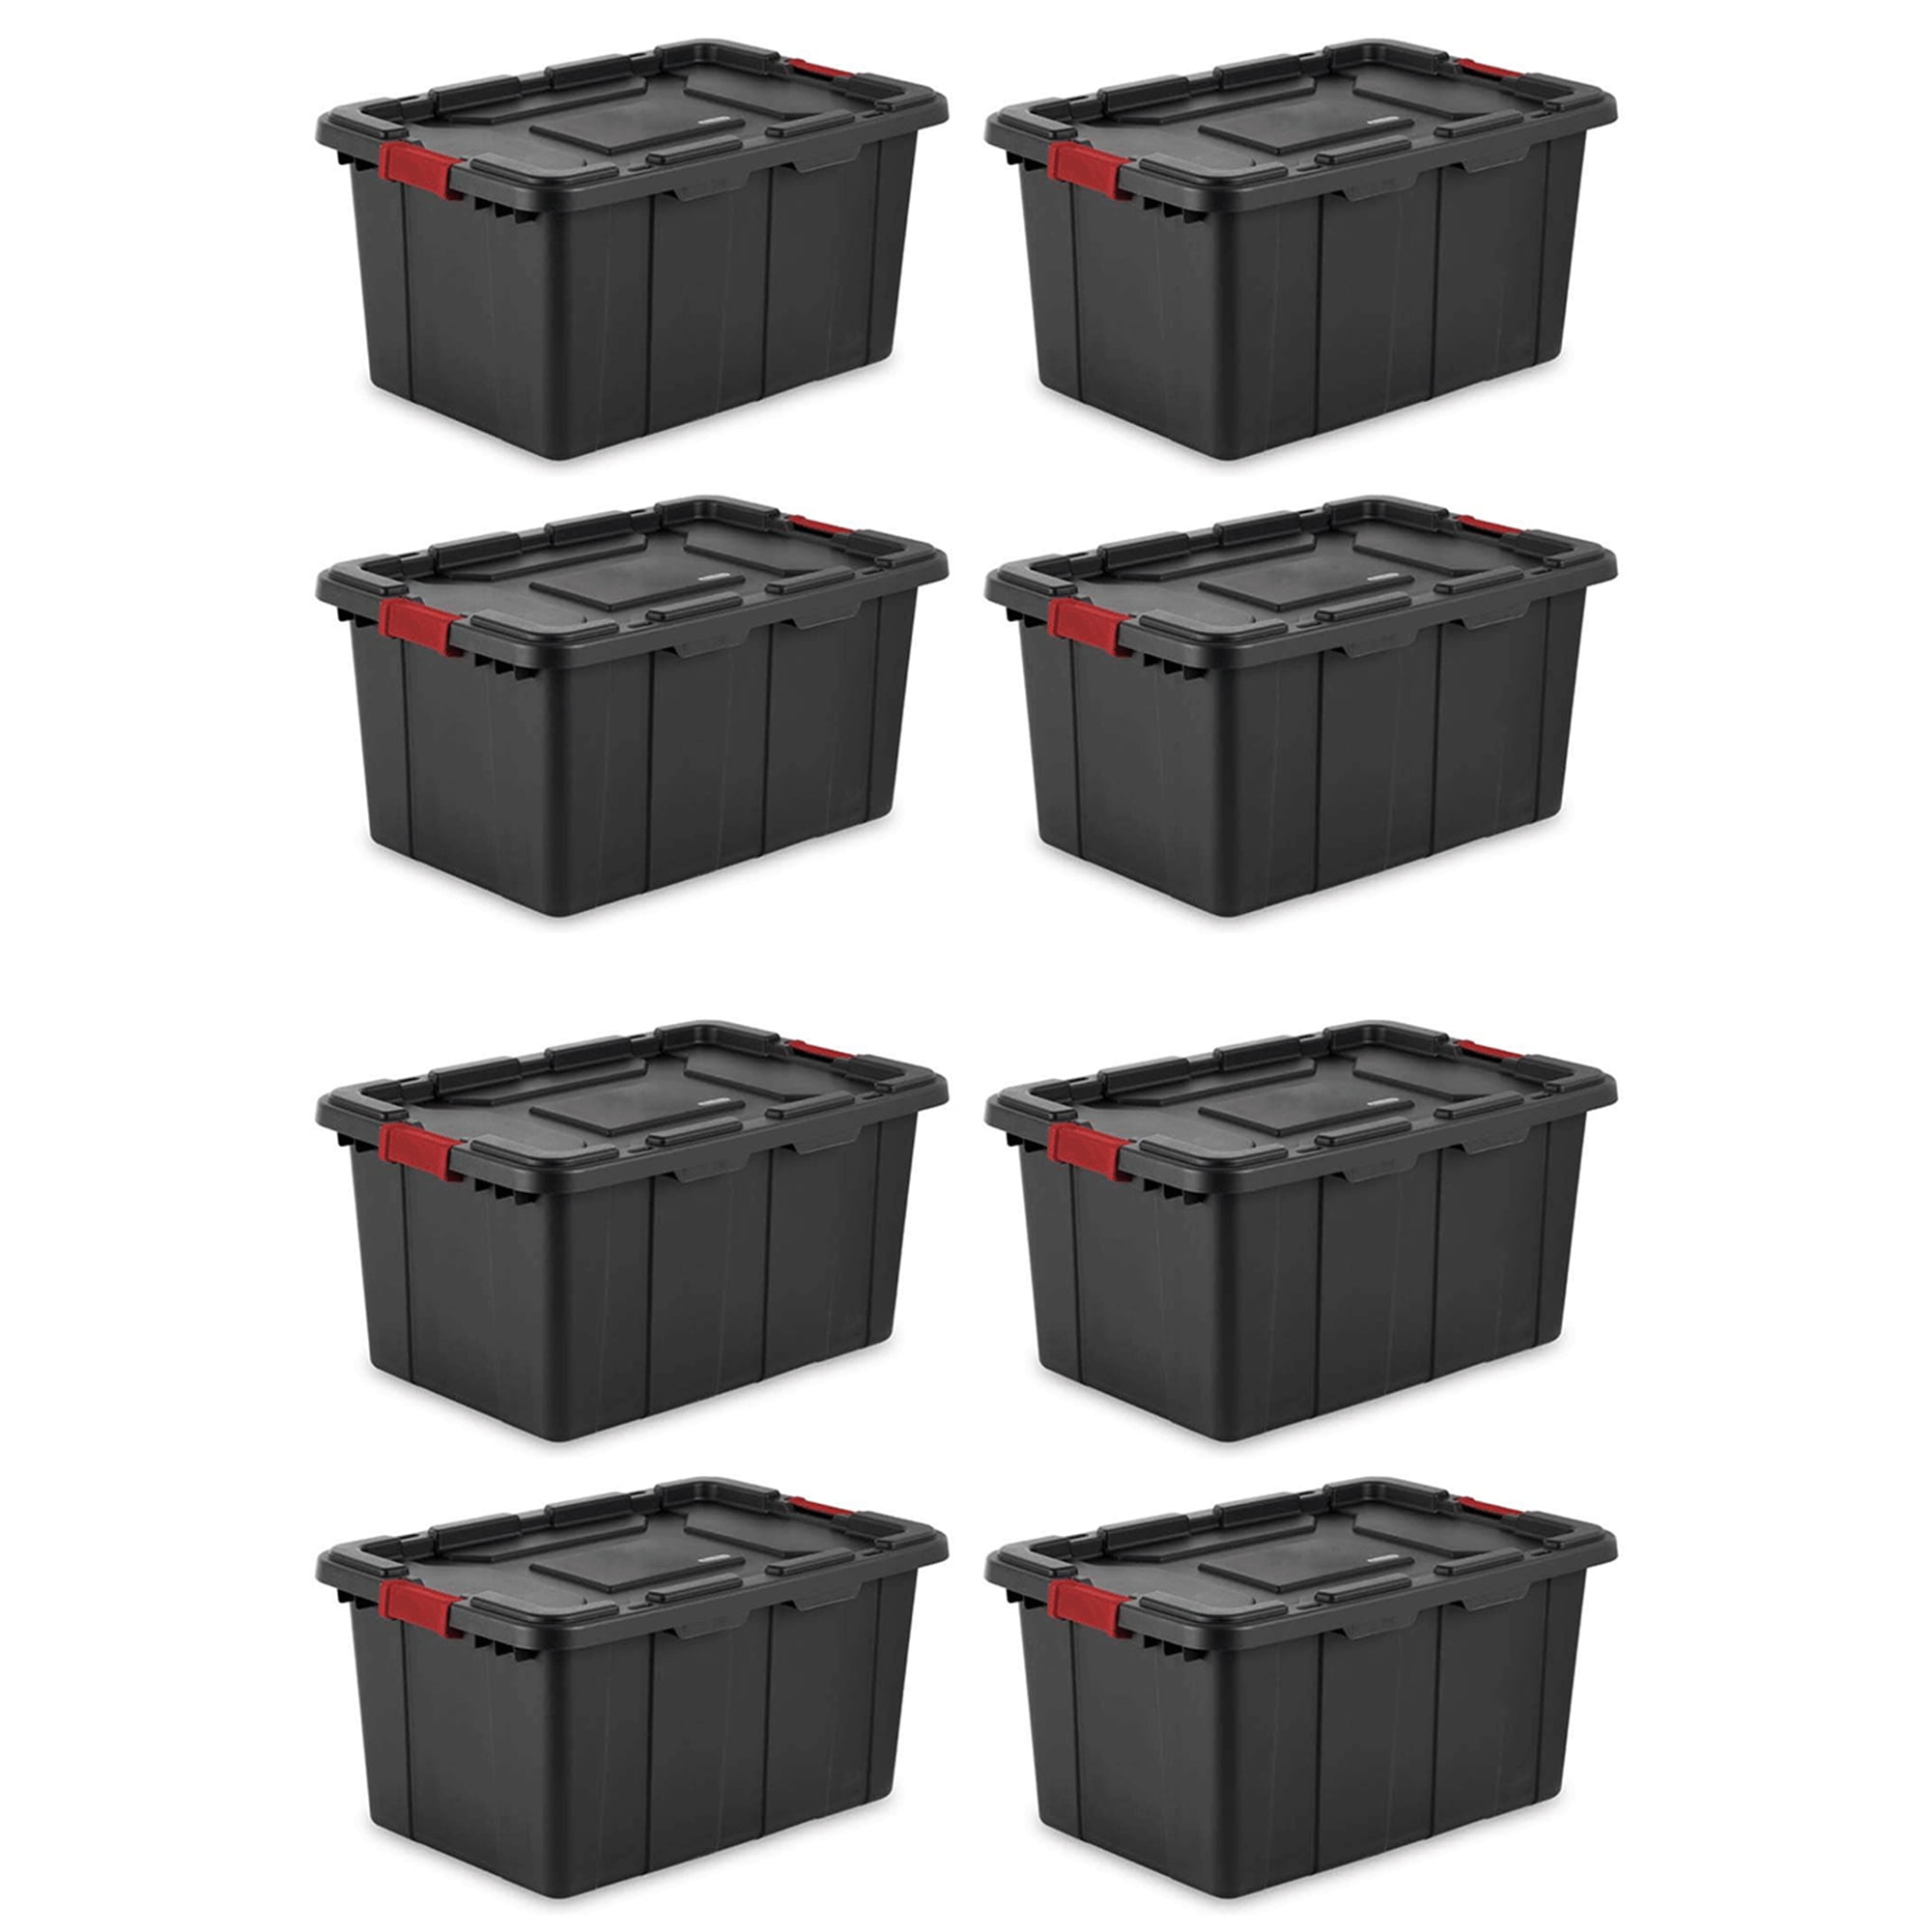 Sterilite 27 Gallon Durable Rugged Industrial Tote w/Red Latches, Black (8  Pack), 1 Piece - Kroger